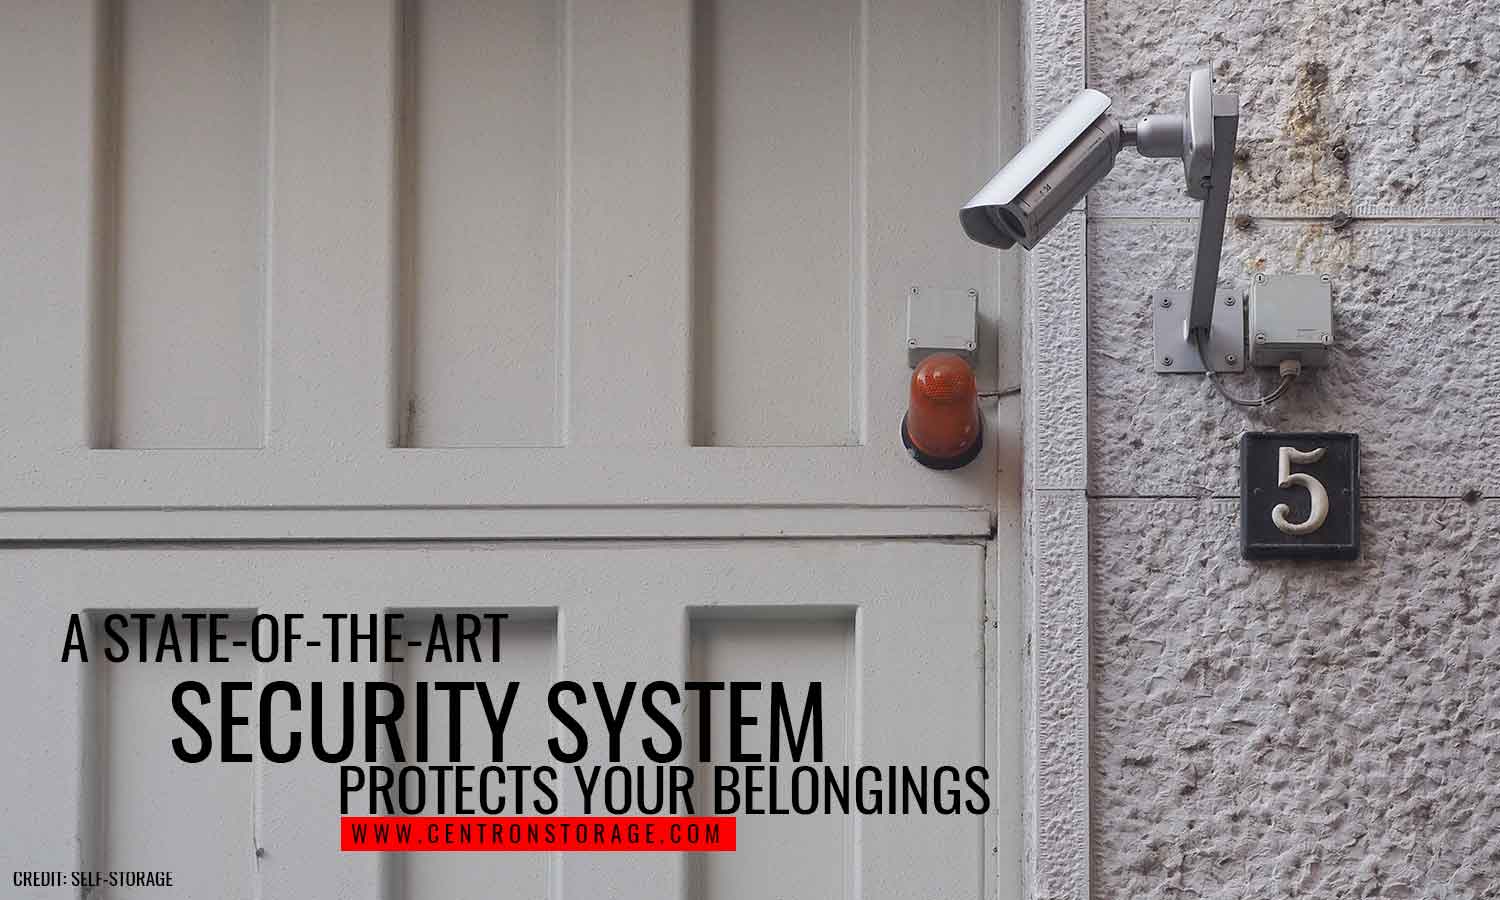 A state-of-the-art security system protects your belongings